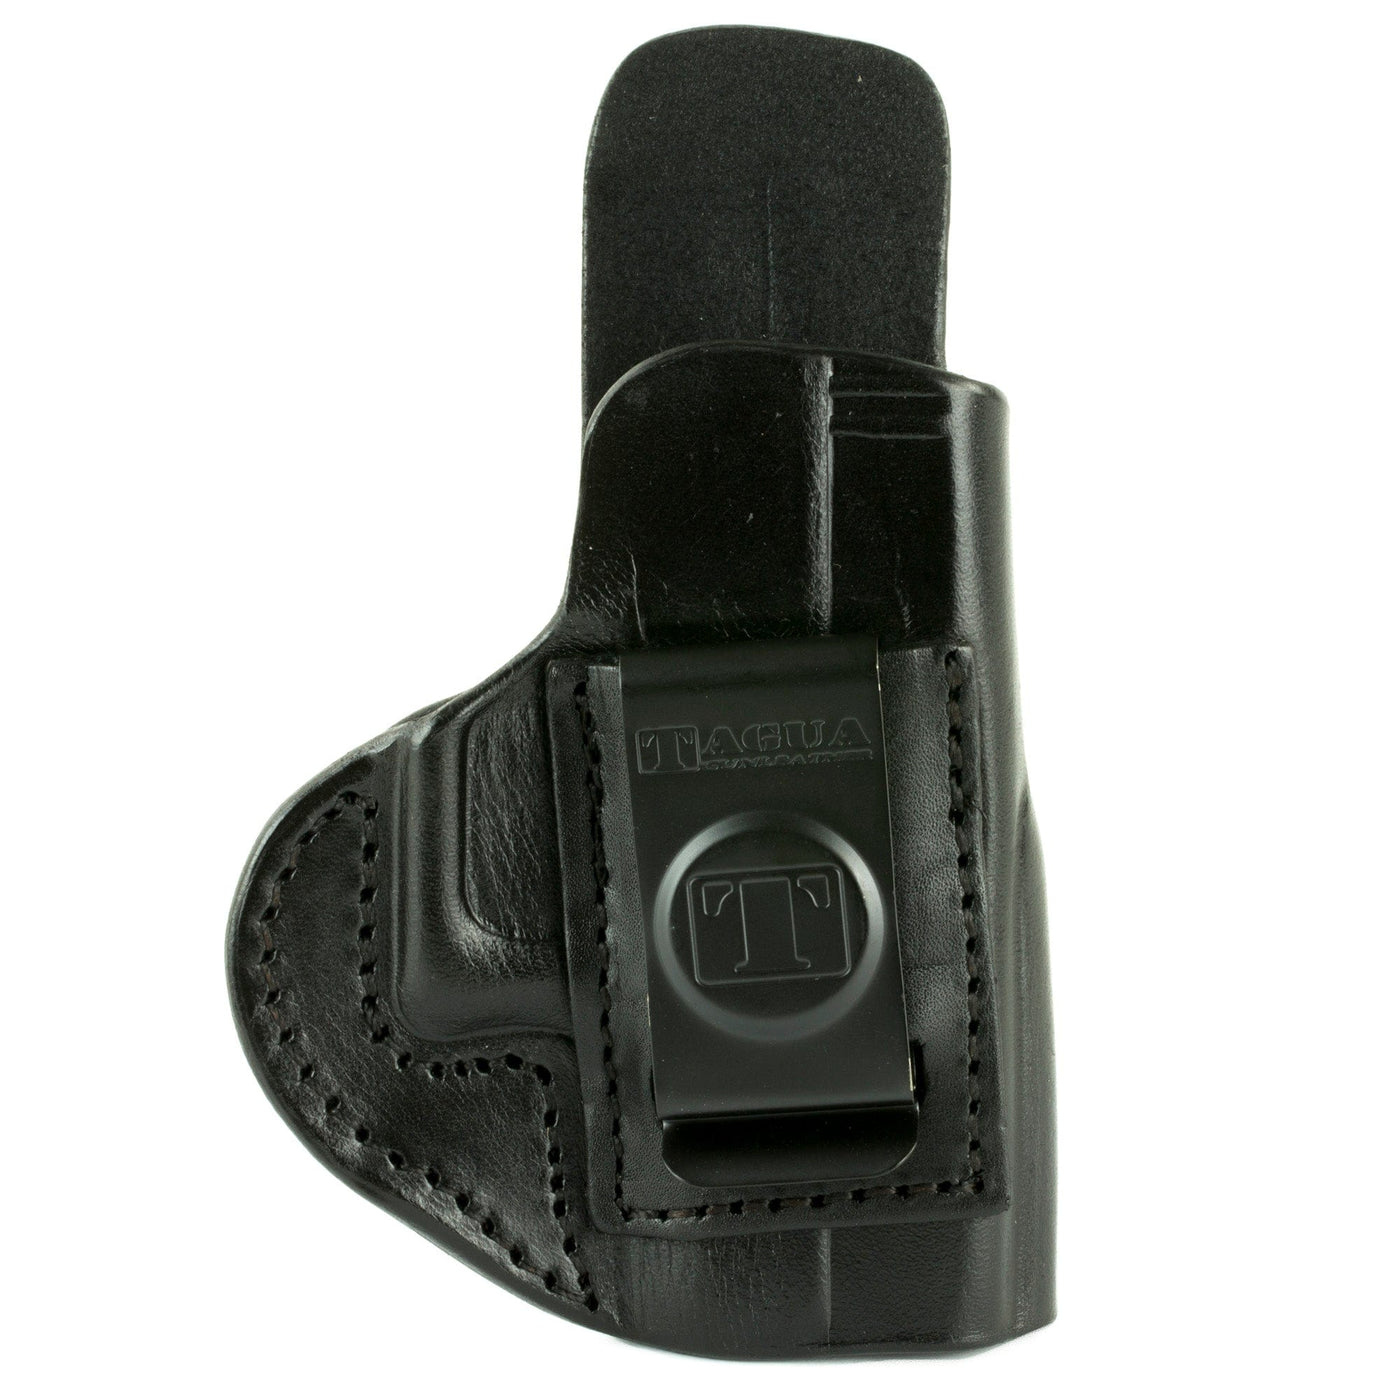 Tagua Tagua Iph In/pant For Glk 43 Rh Blk Holsters